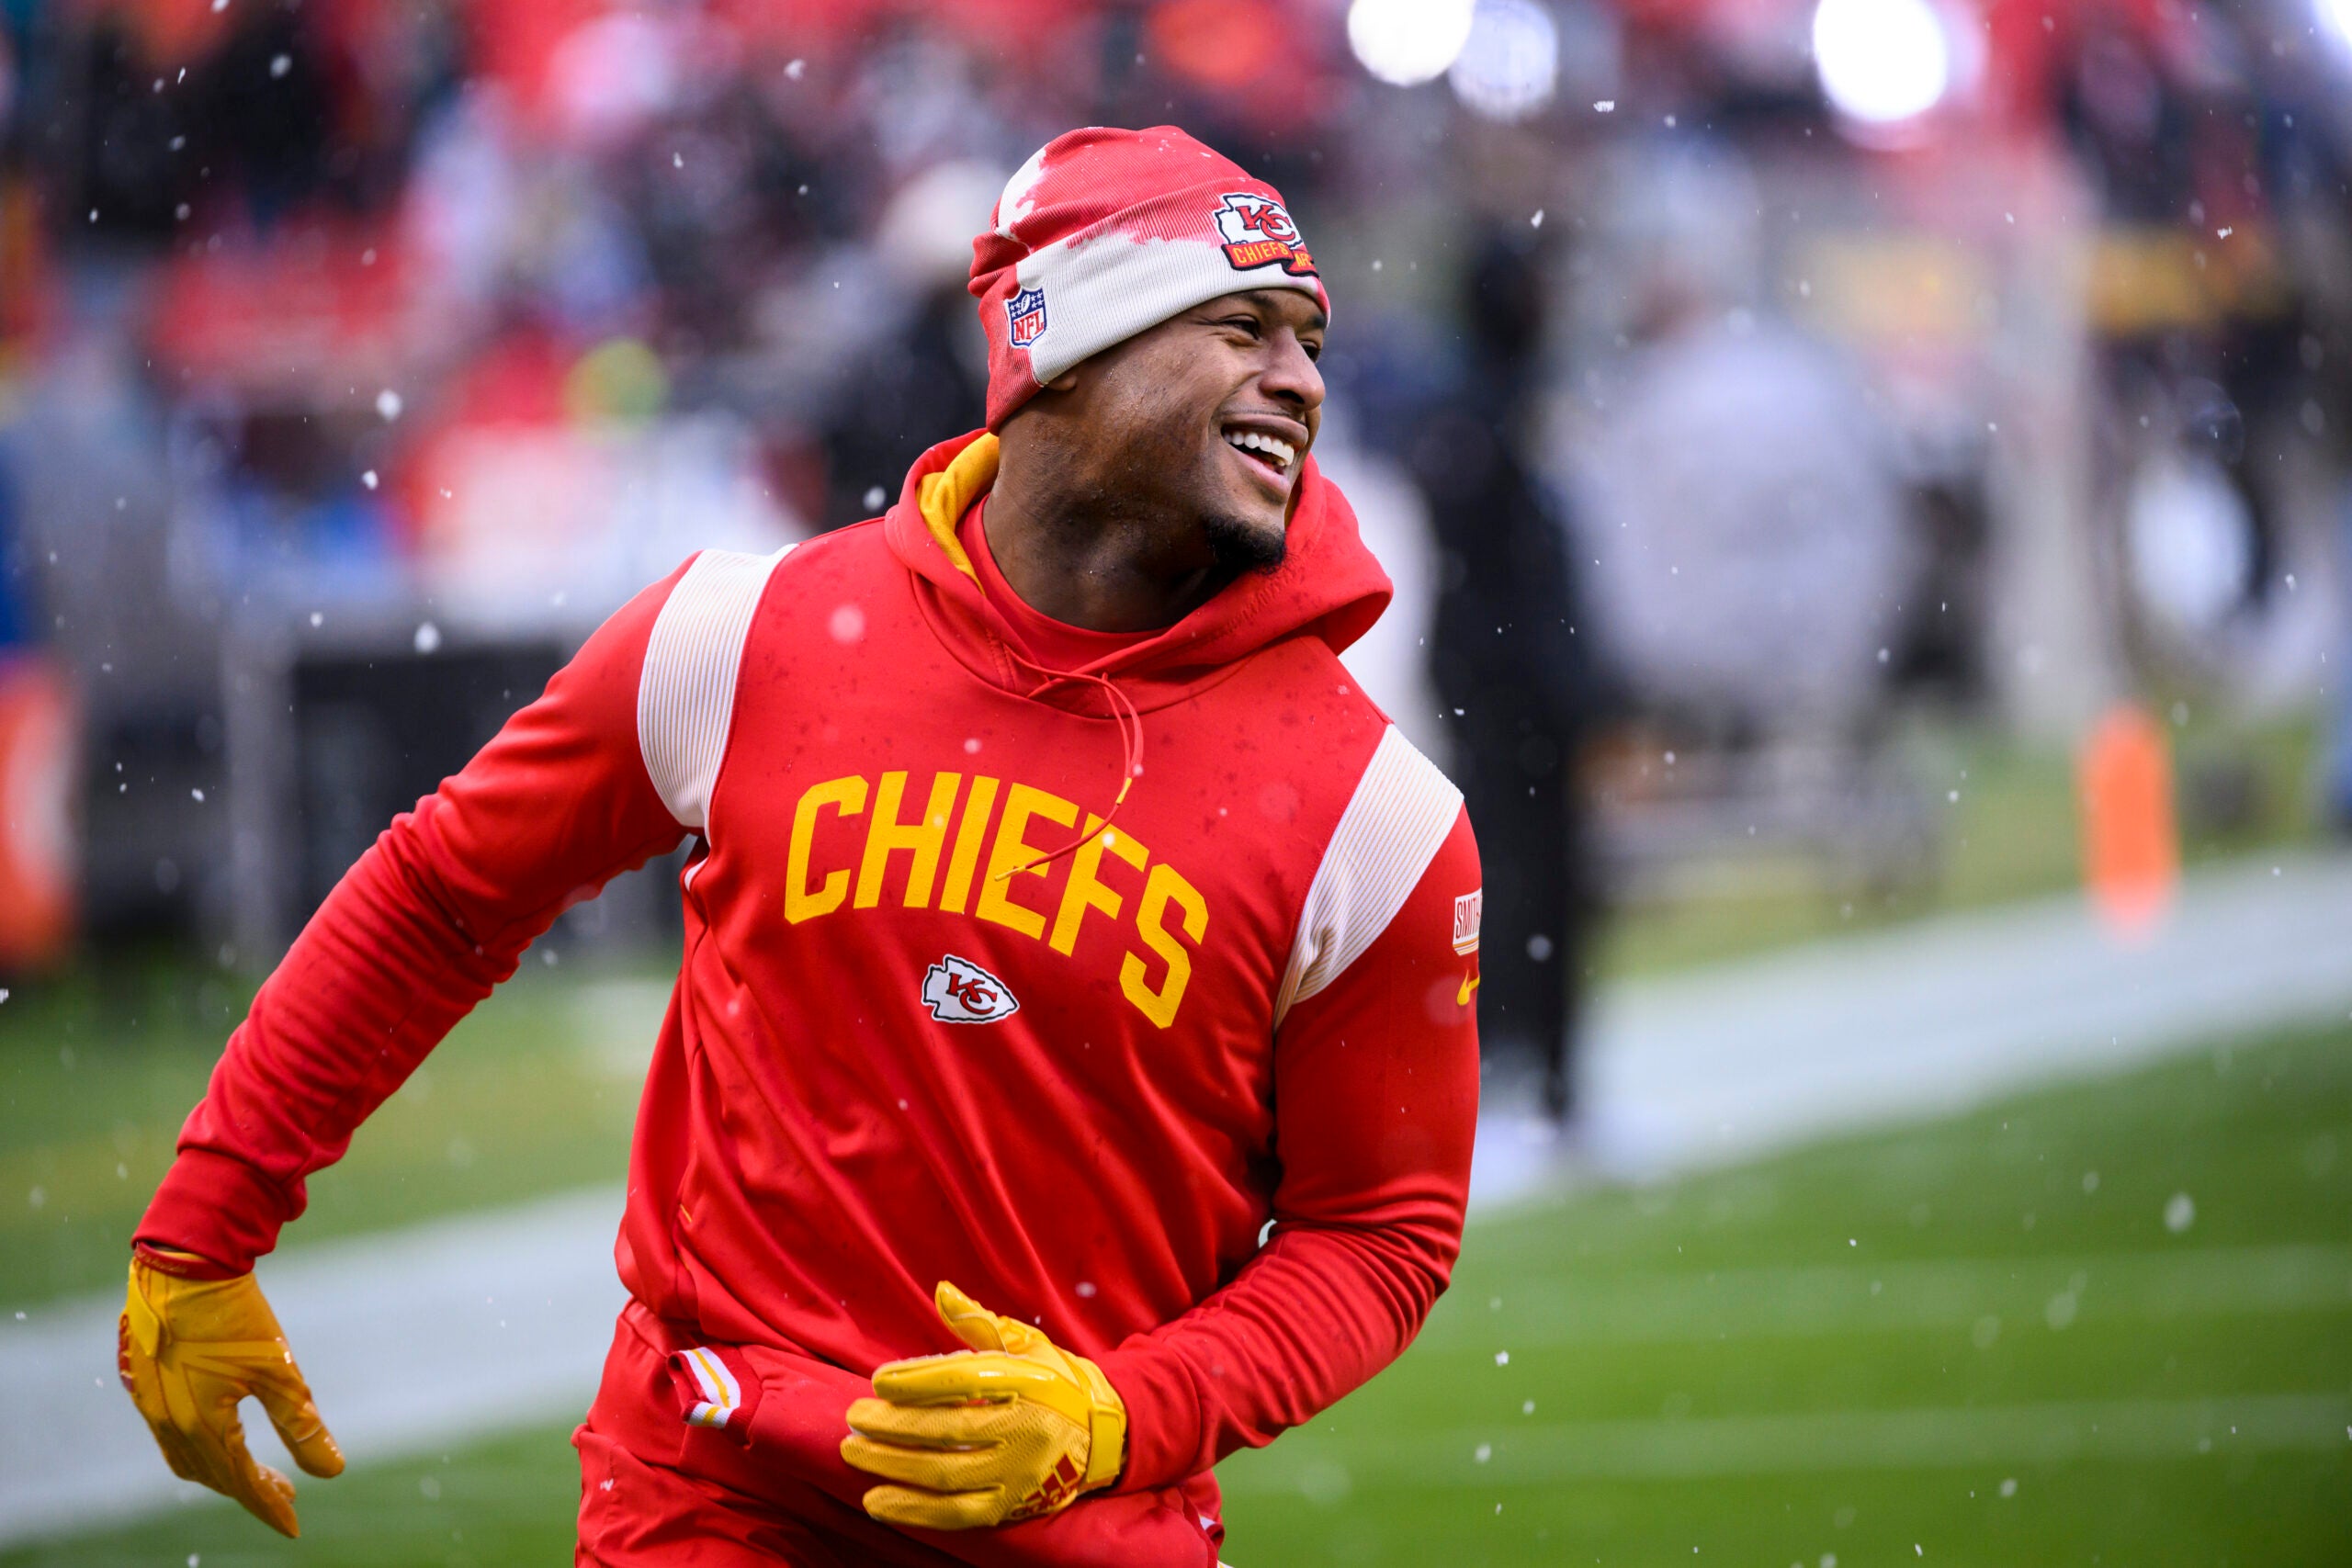 Kansas City Chiefs wide receiver JuJu Smith-Schuster during warmups before an NFL divisional round playoff football game against the Jacksonville Jaguars, Saturday, Jan. 21, 2023 in Kansas City, Mo.